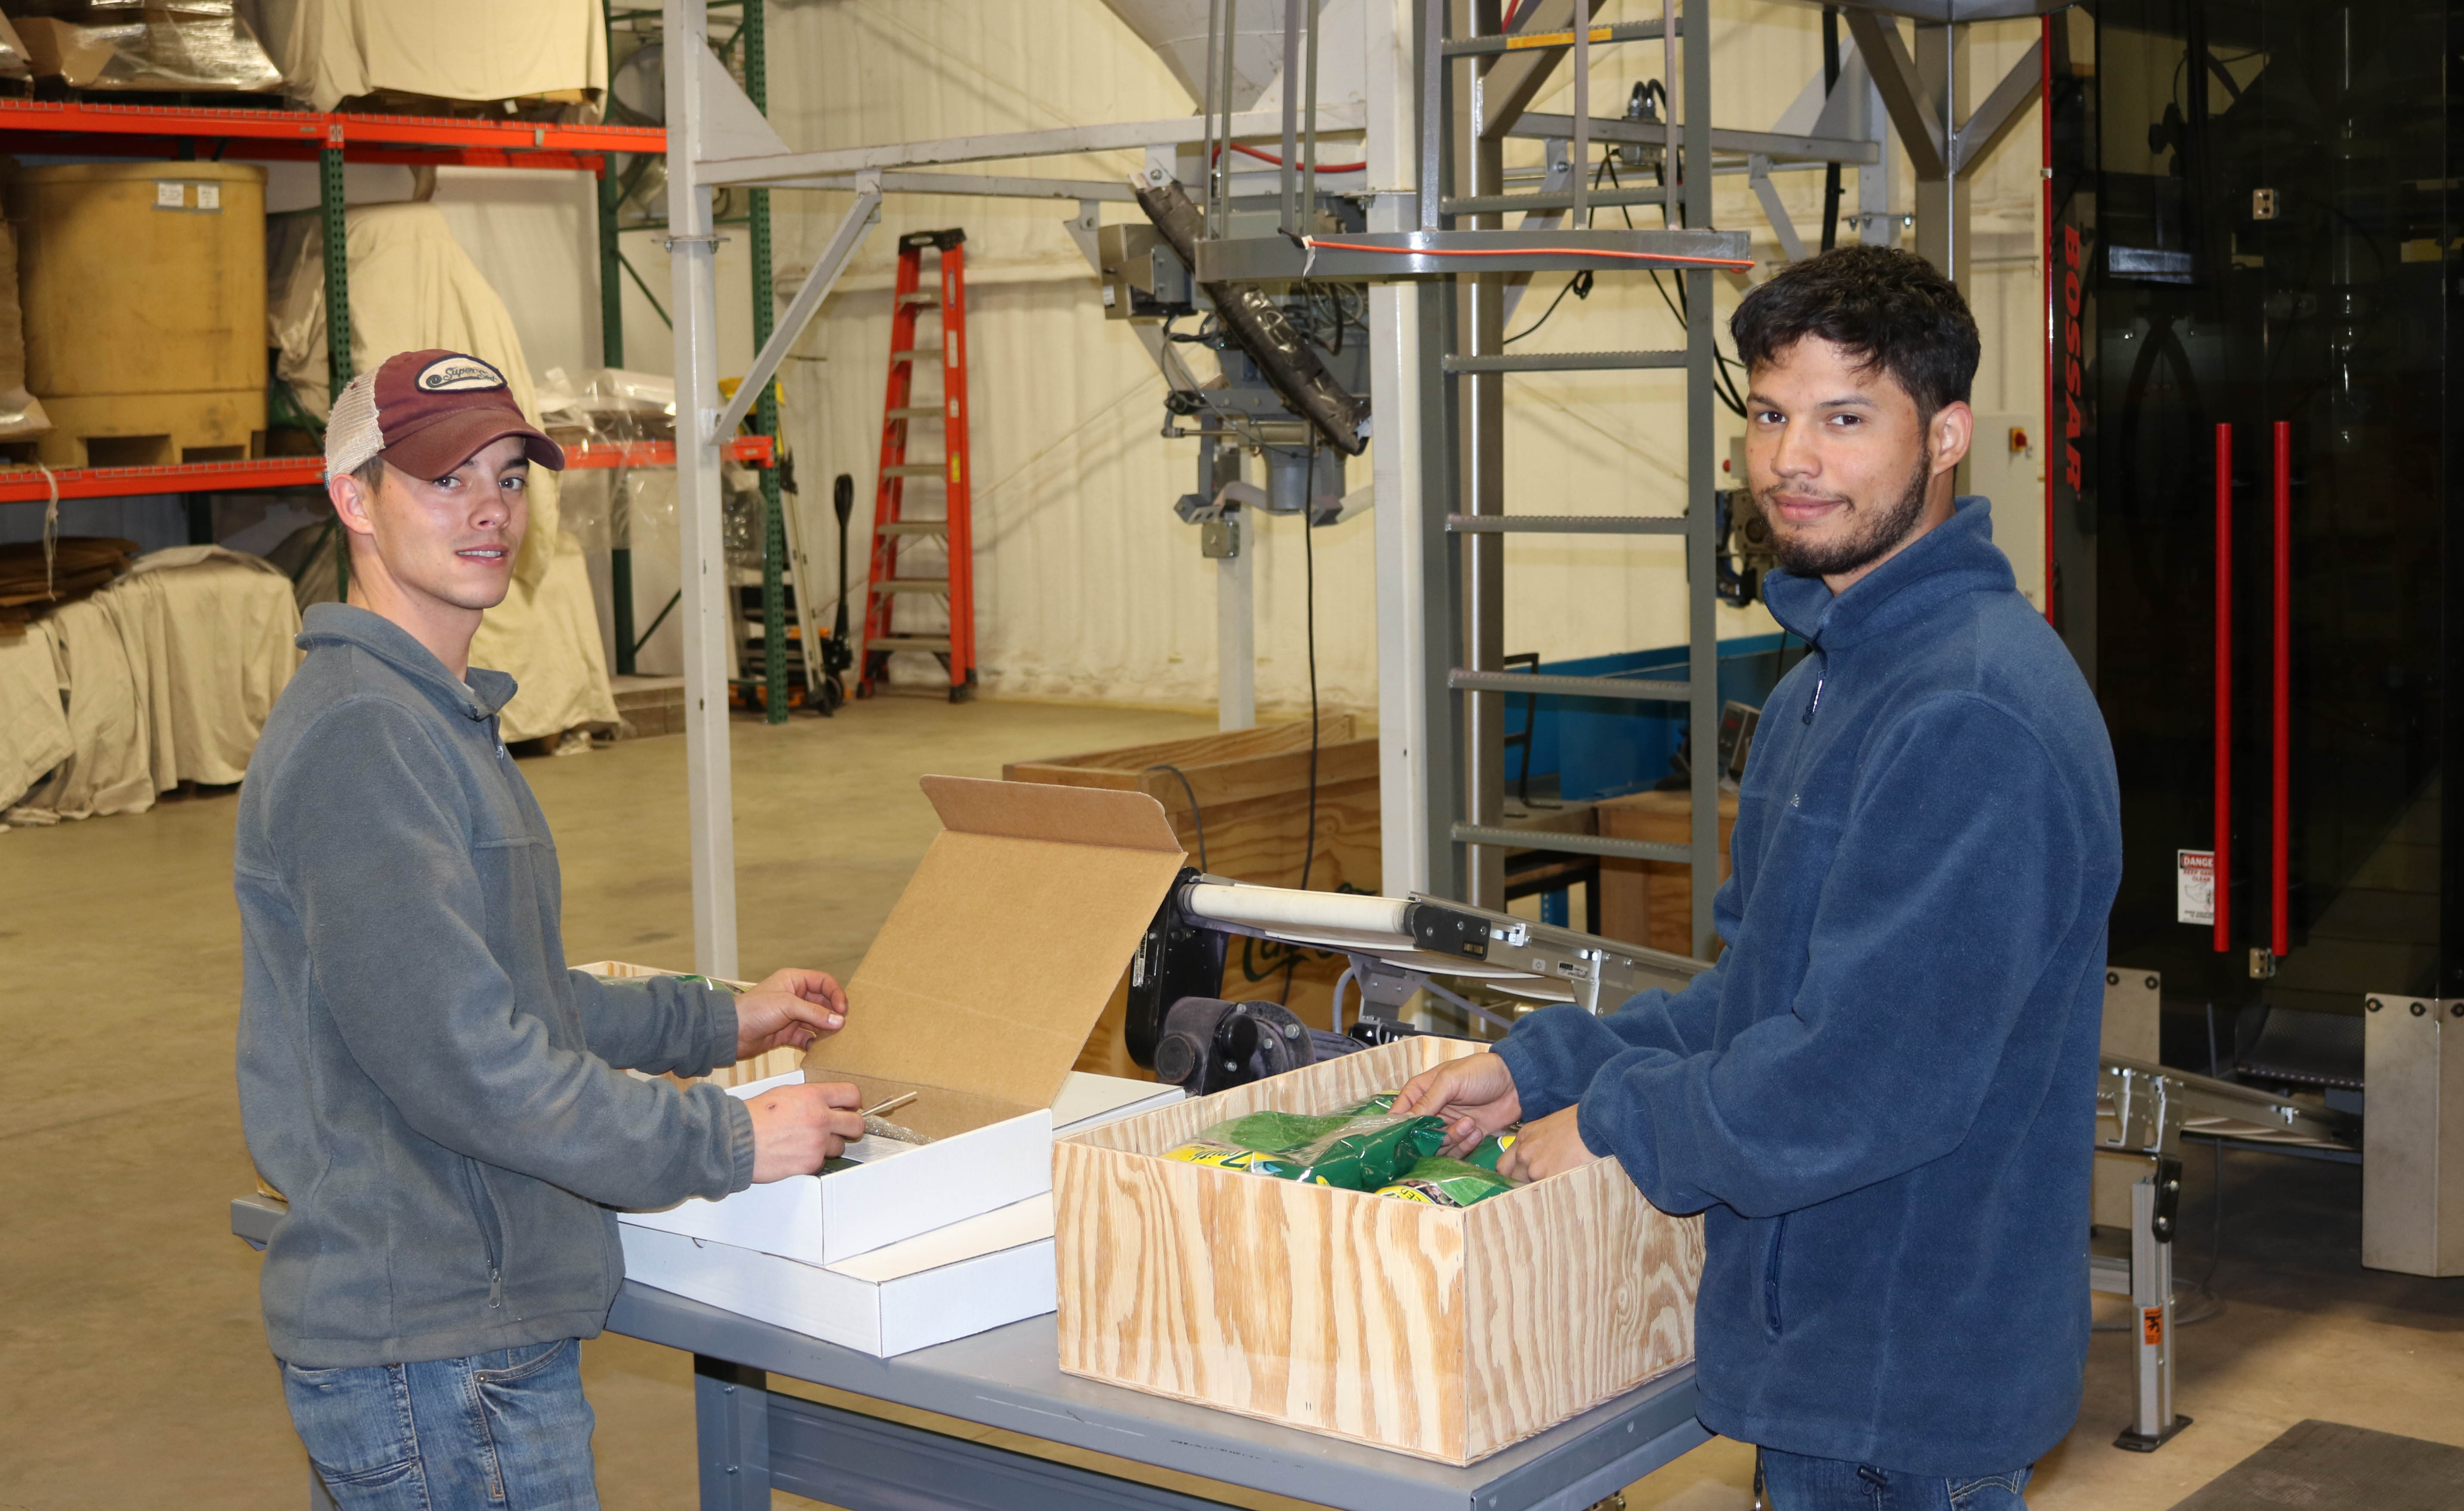 Matt Burnam (left) and Juan Brown fill and ship orders at the Patten Seed distribution center.